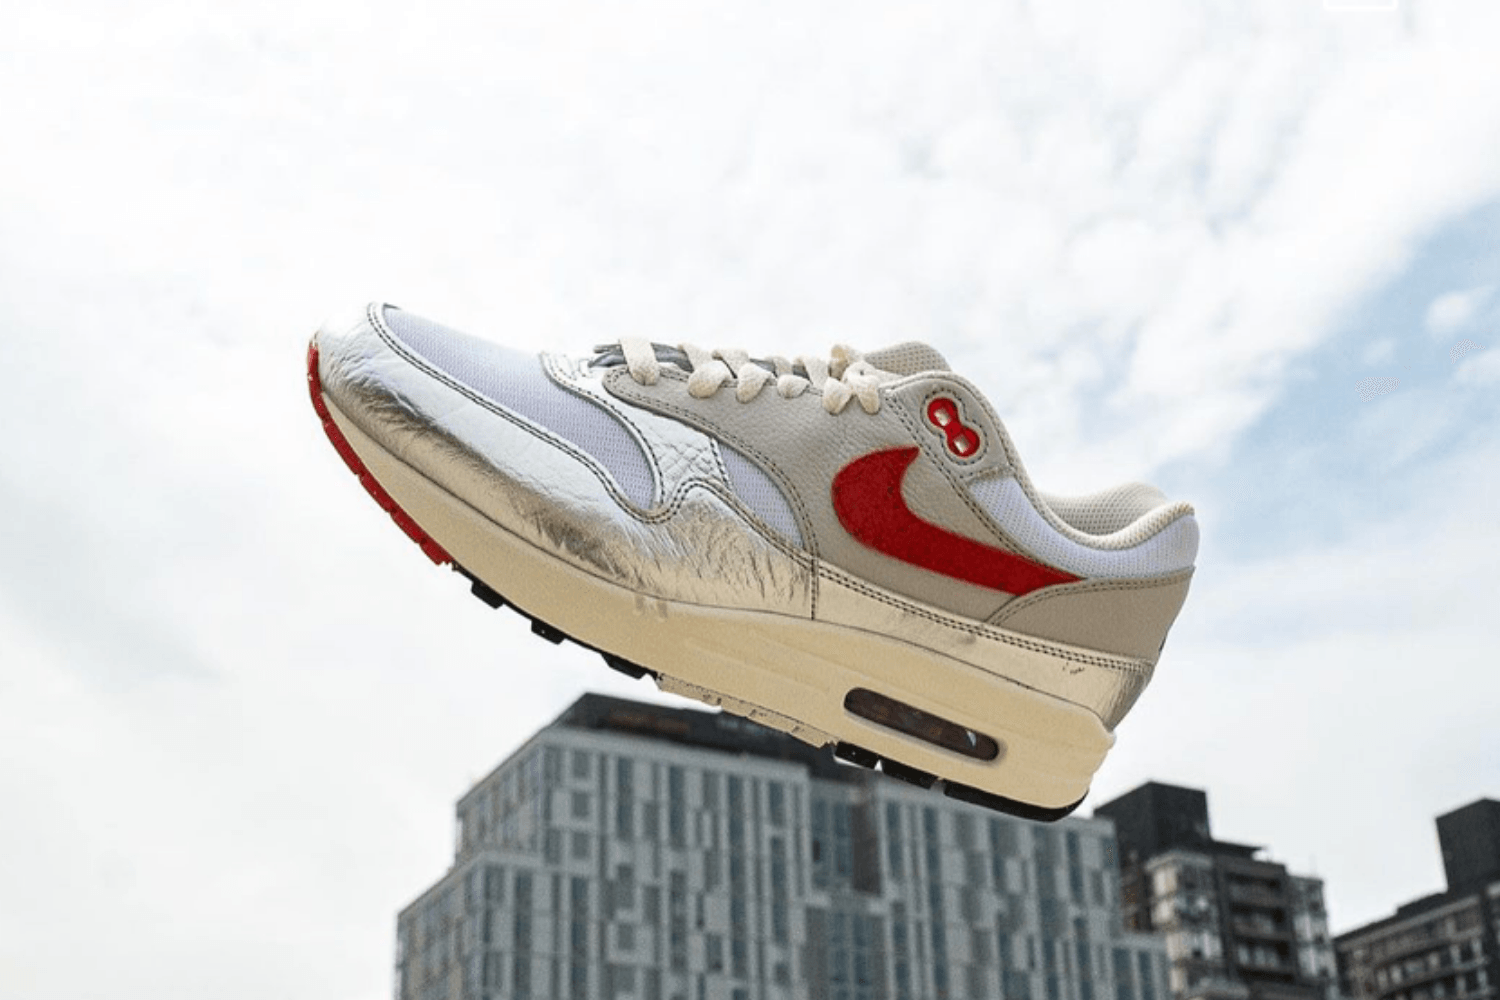 The Nike Air Max 1 arrives in a 'Hot Sauce' colorway